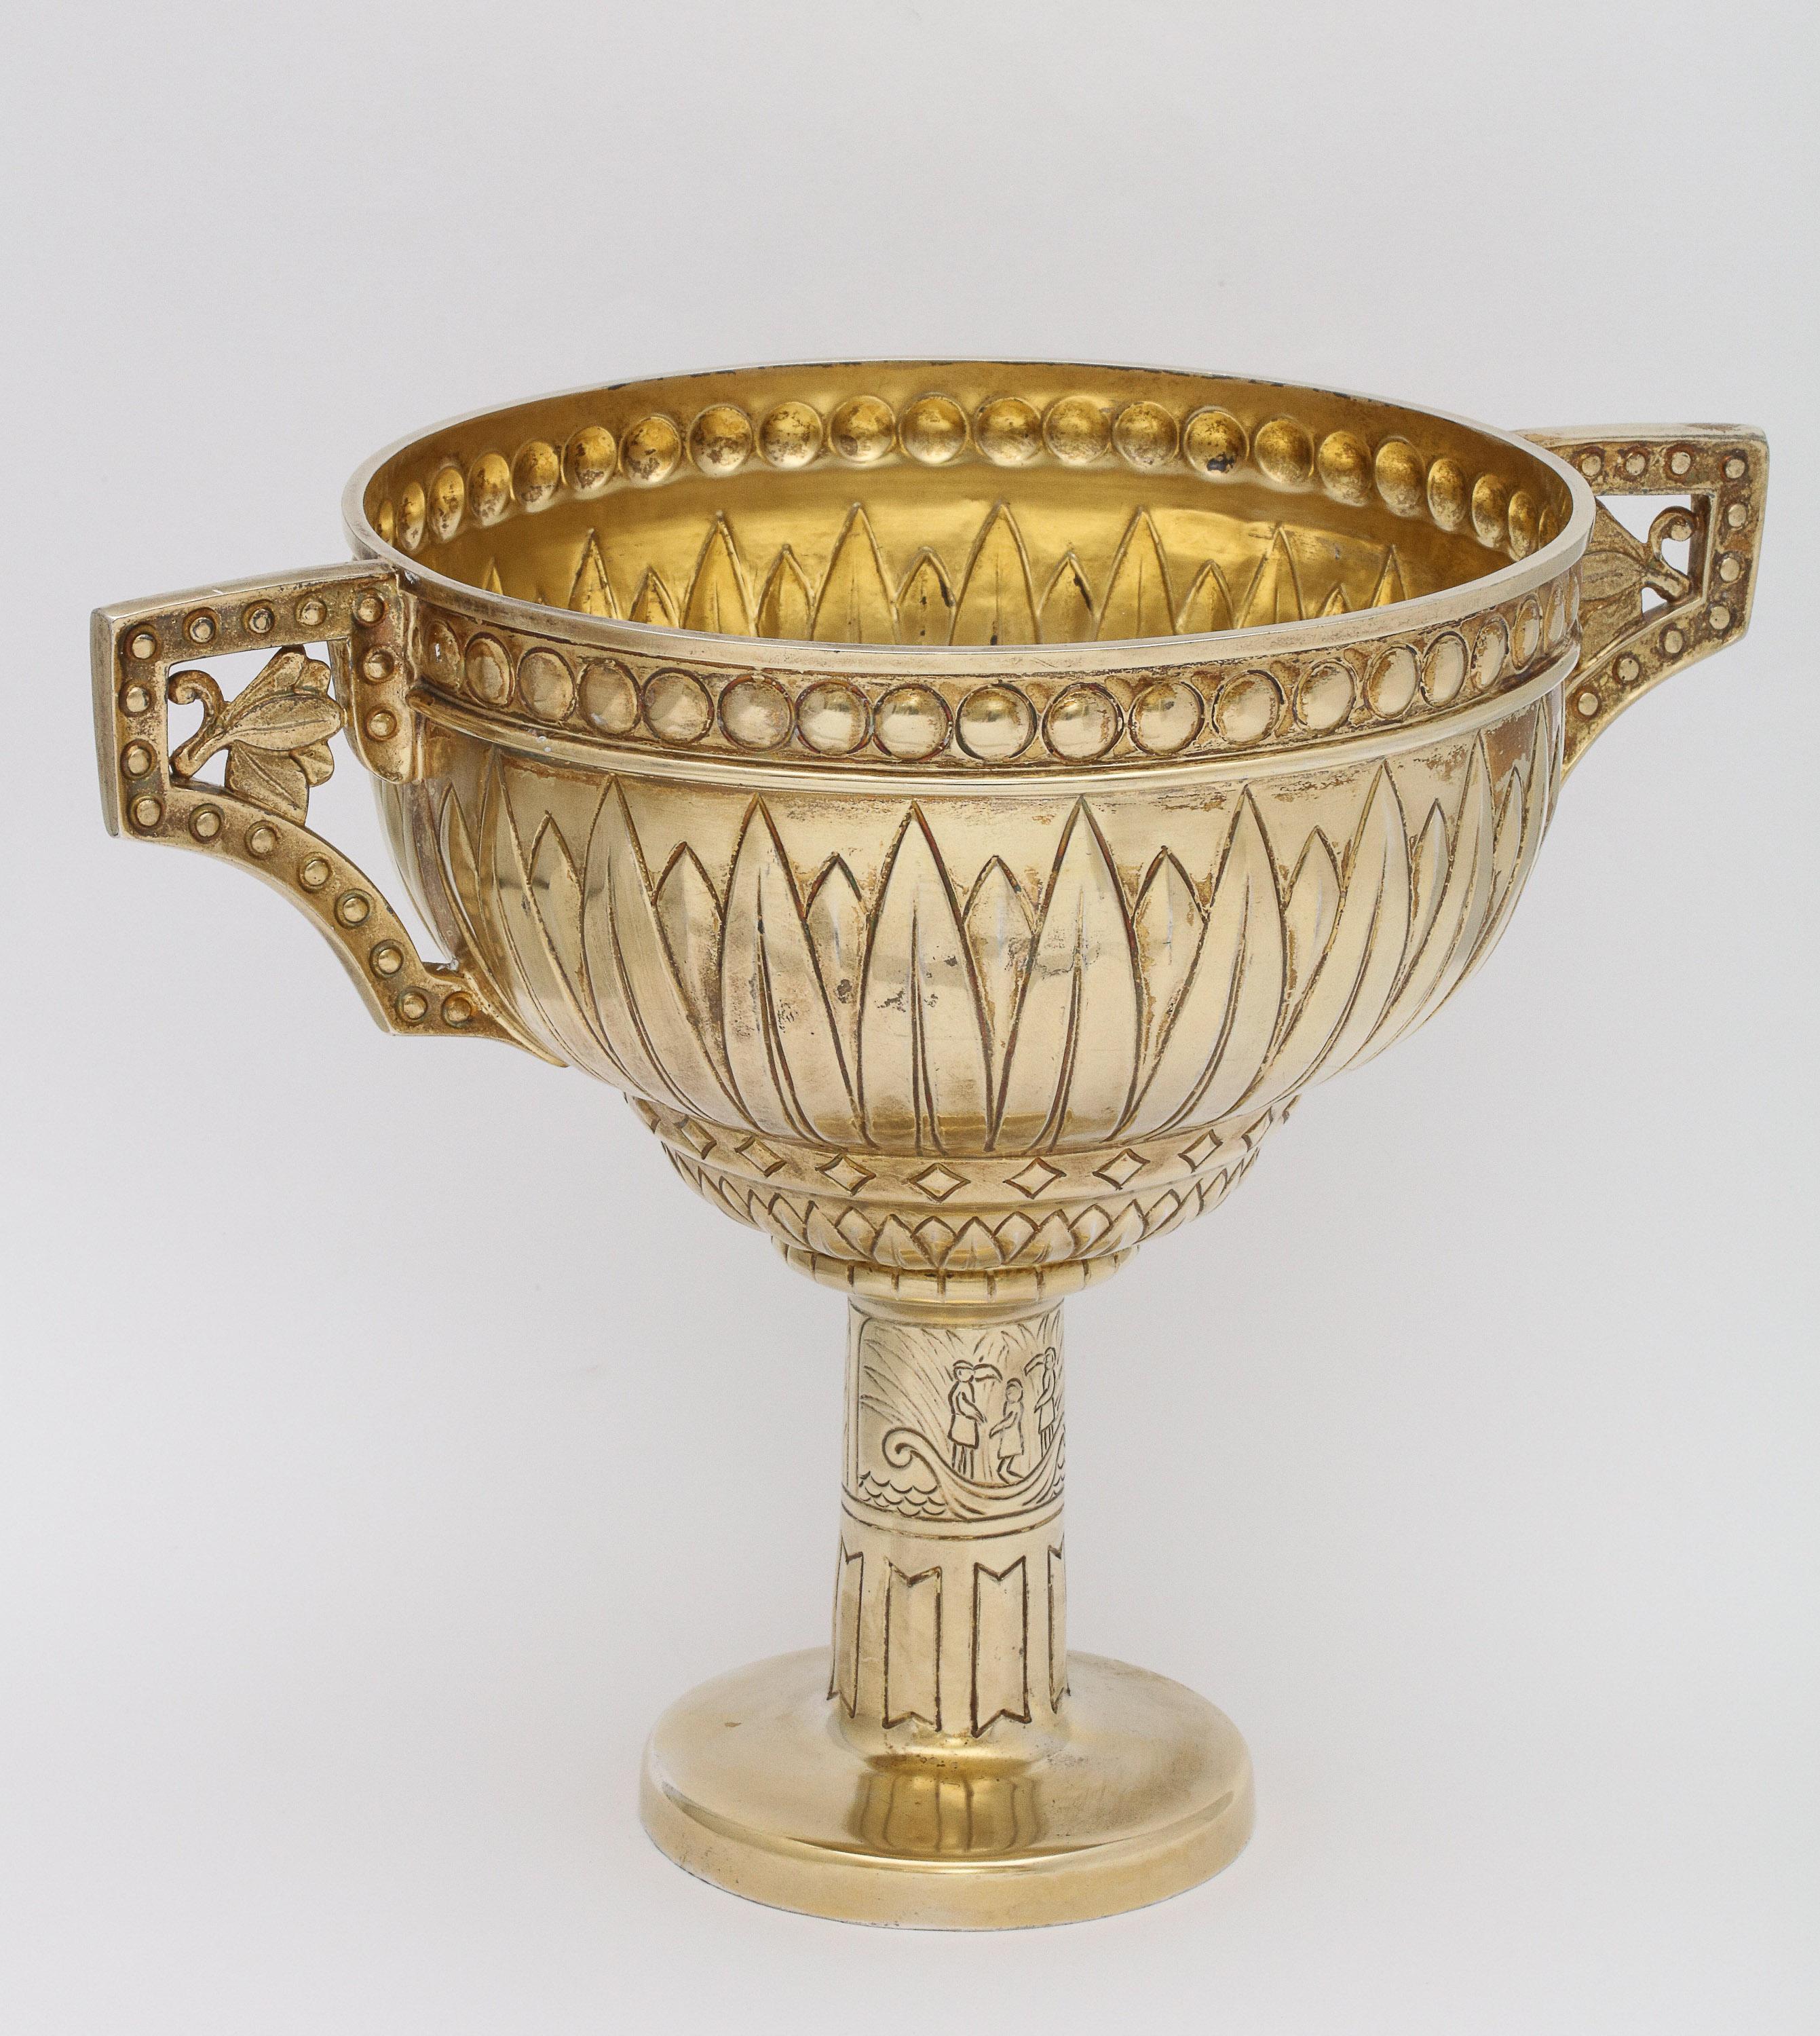 Art Deco, sterling silver-gilt, Egyptian Revival, two-handled centerpiece, inspired by the discovery of King Tut's tomb, Birmingham, England, 1922, Bracker and Sydenham - makers. Measures 7 inches high x 9 1/3 inches wide (handle to handle) x 6 1/4